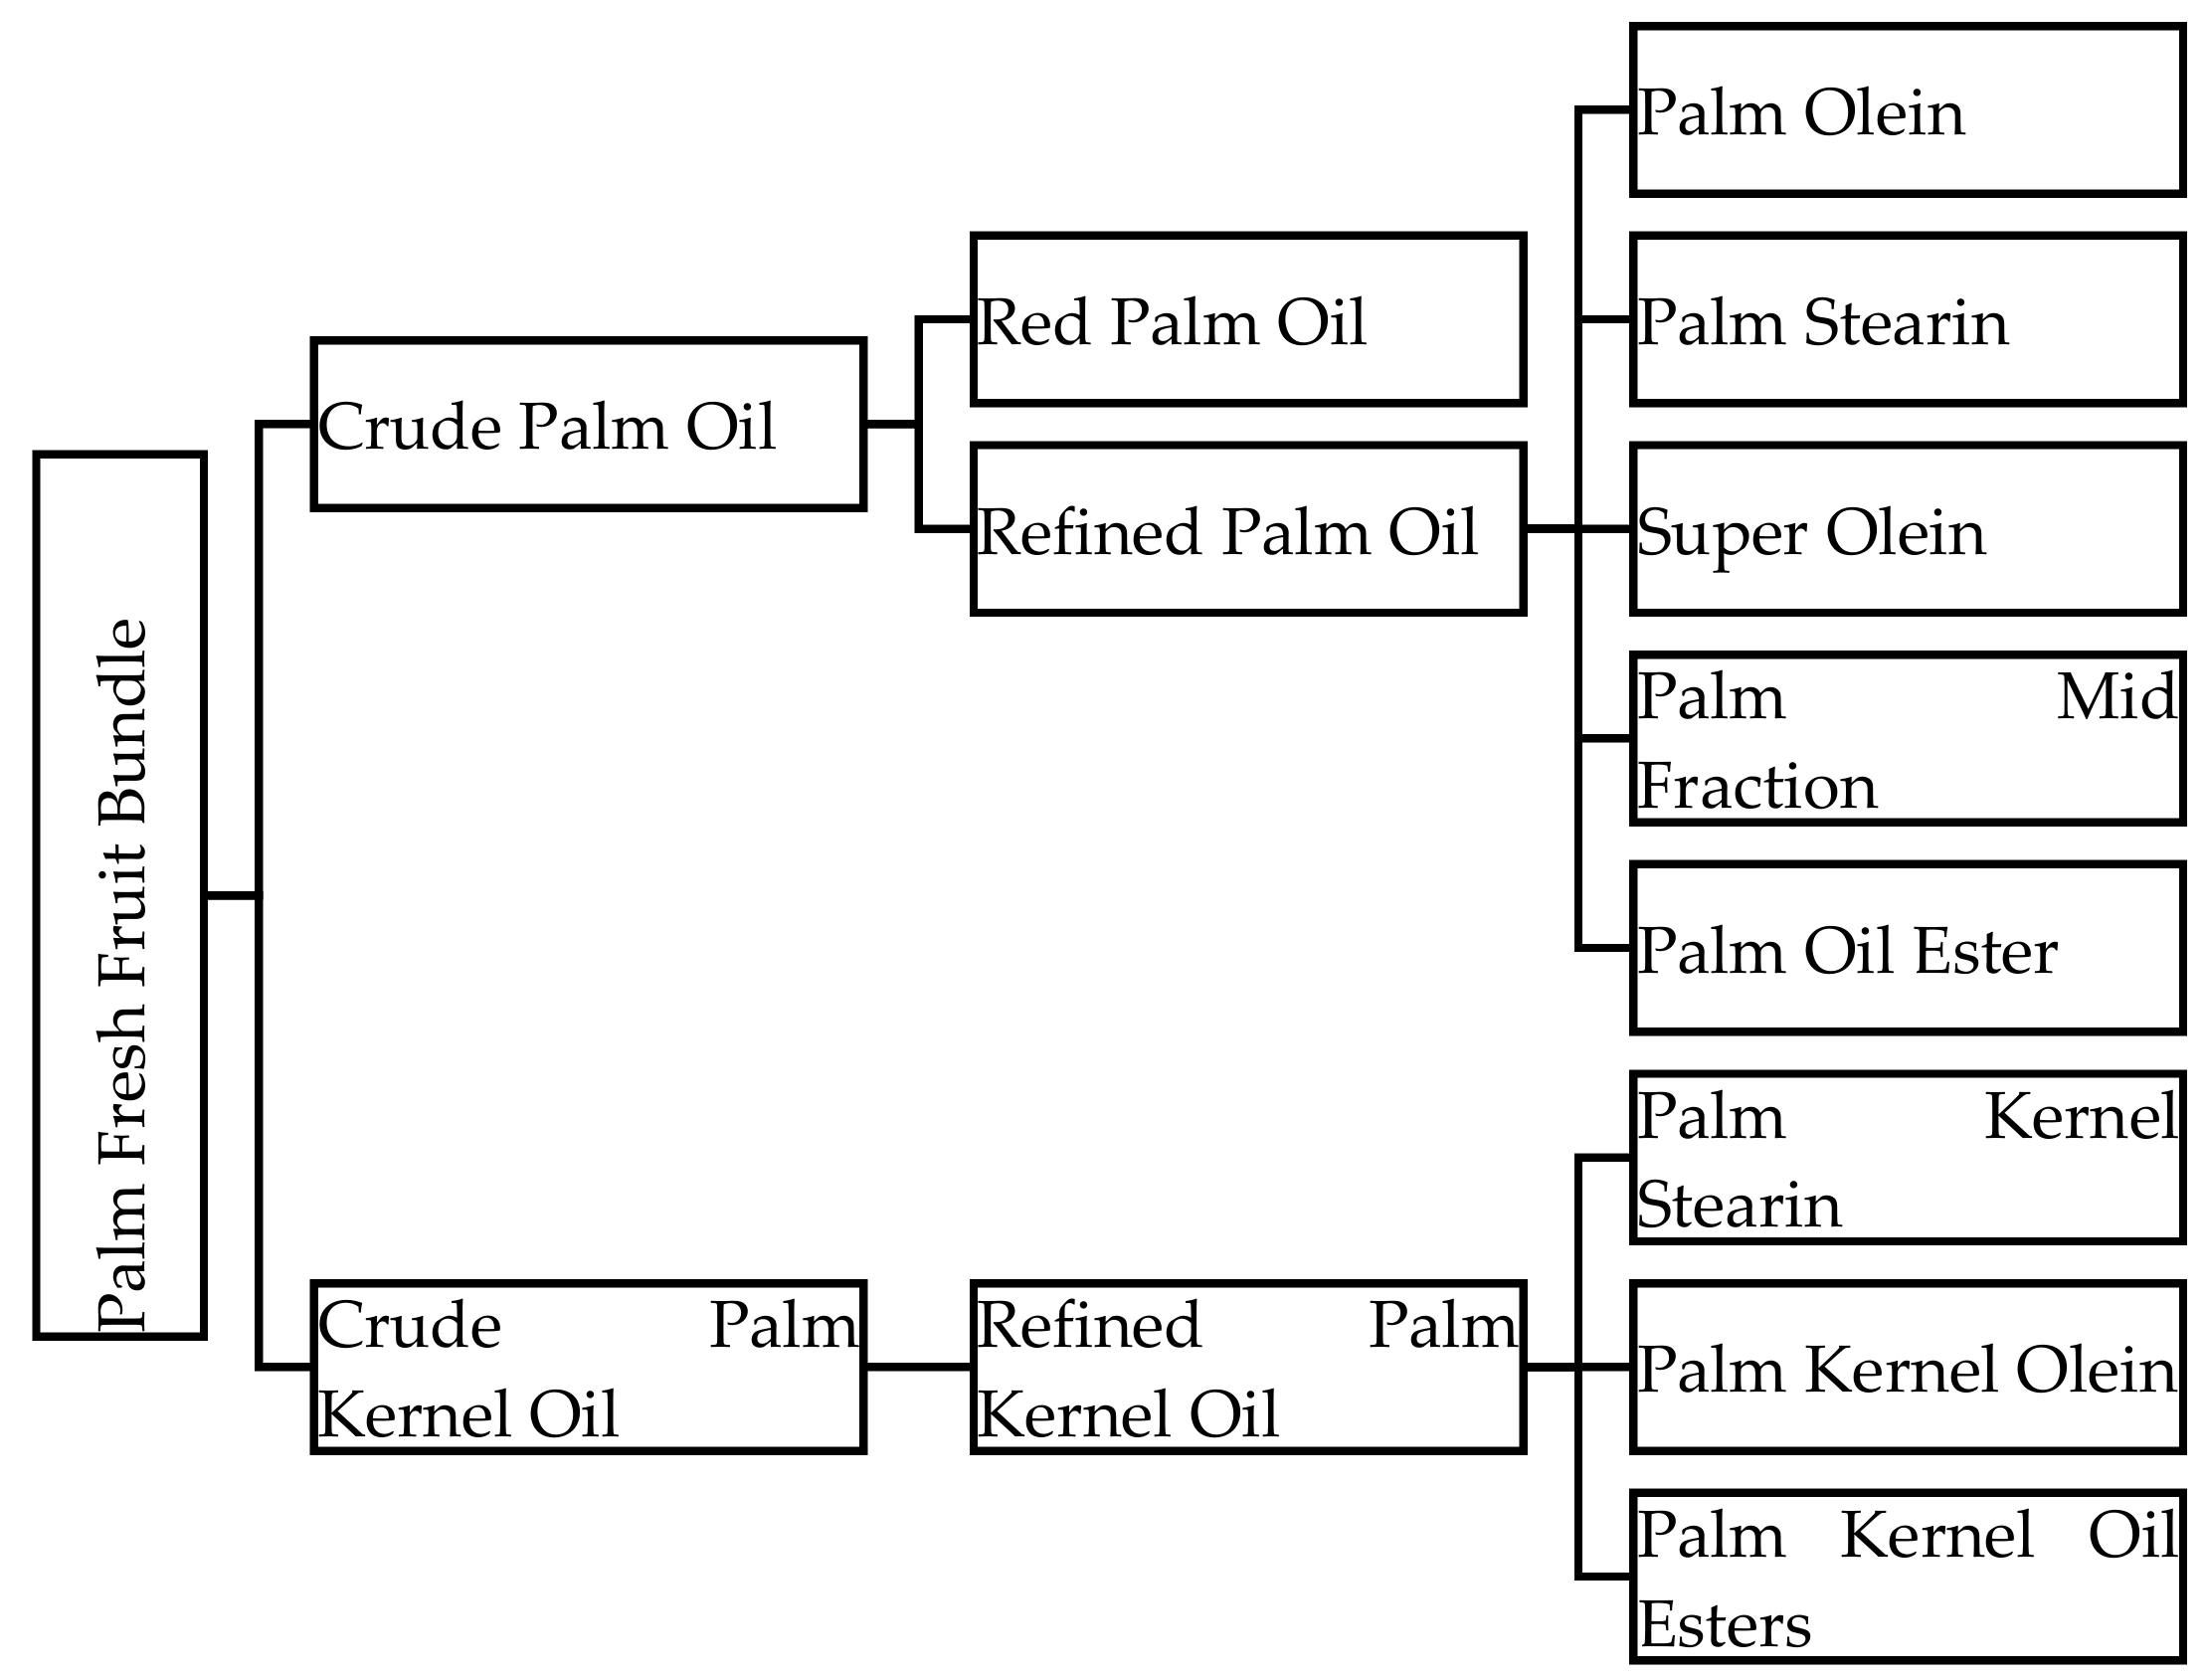 An overview of palm oil and palm kernel oil production process__